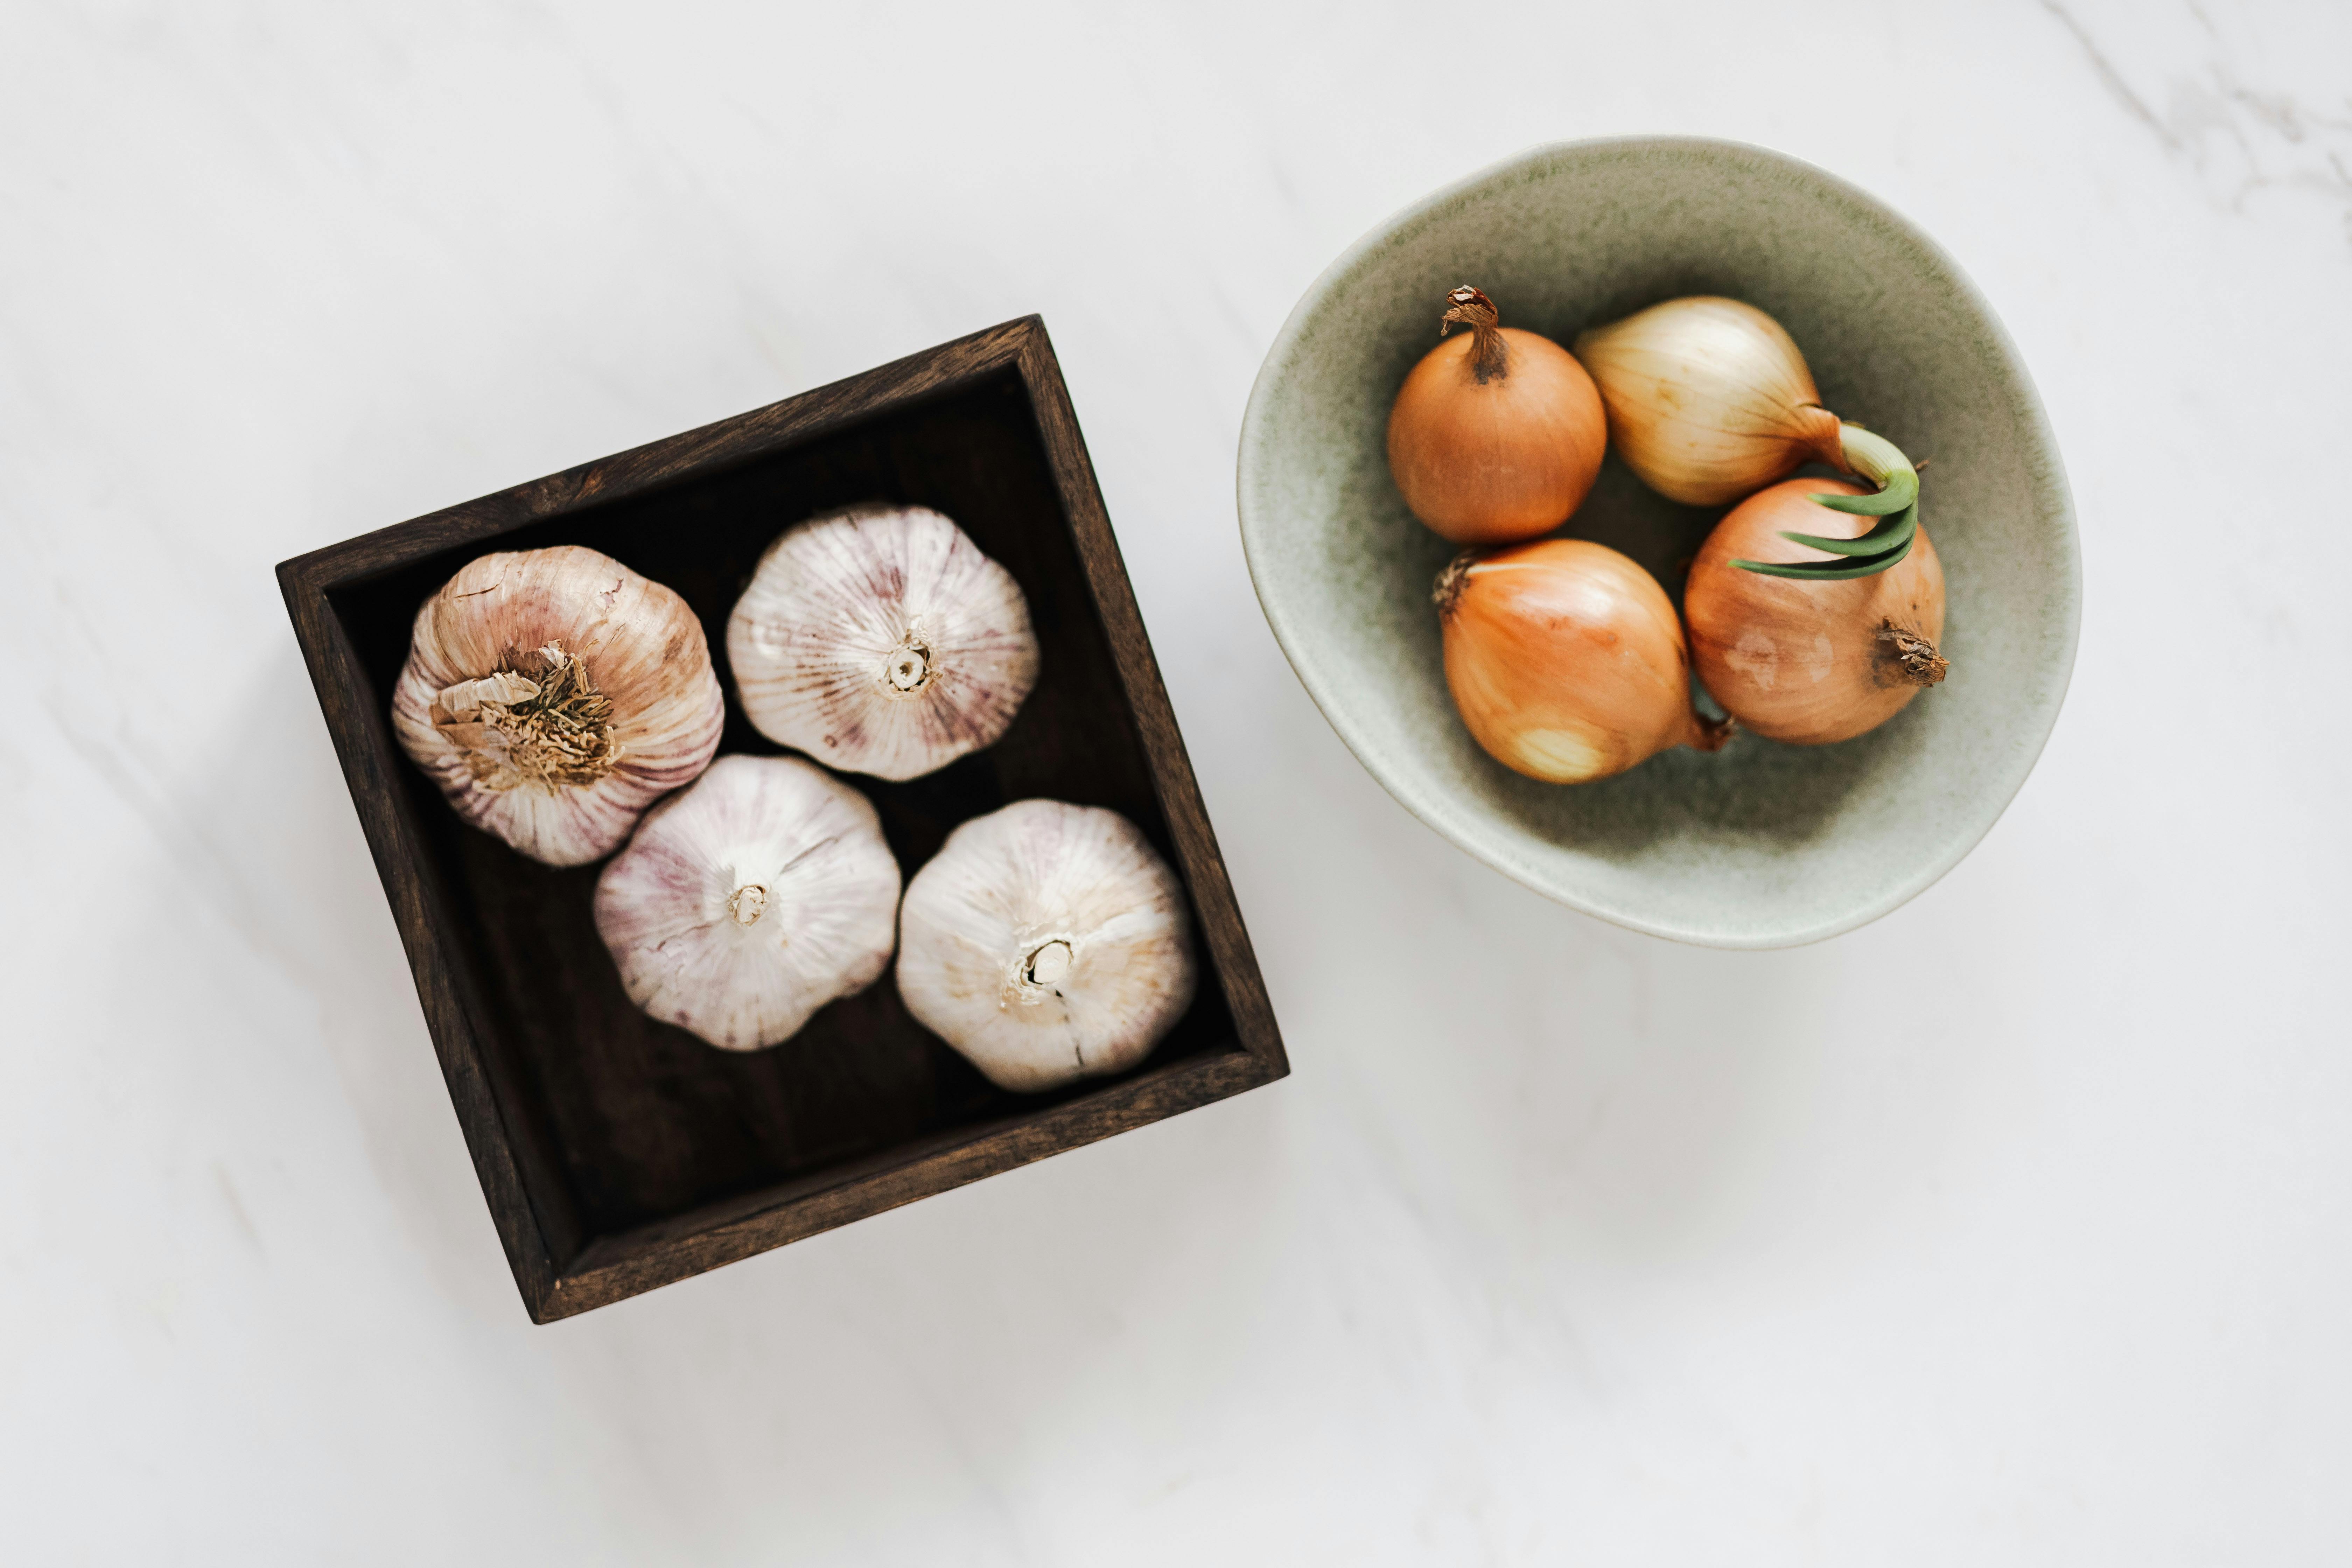 assorted organic onions and garlic on marble background